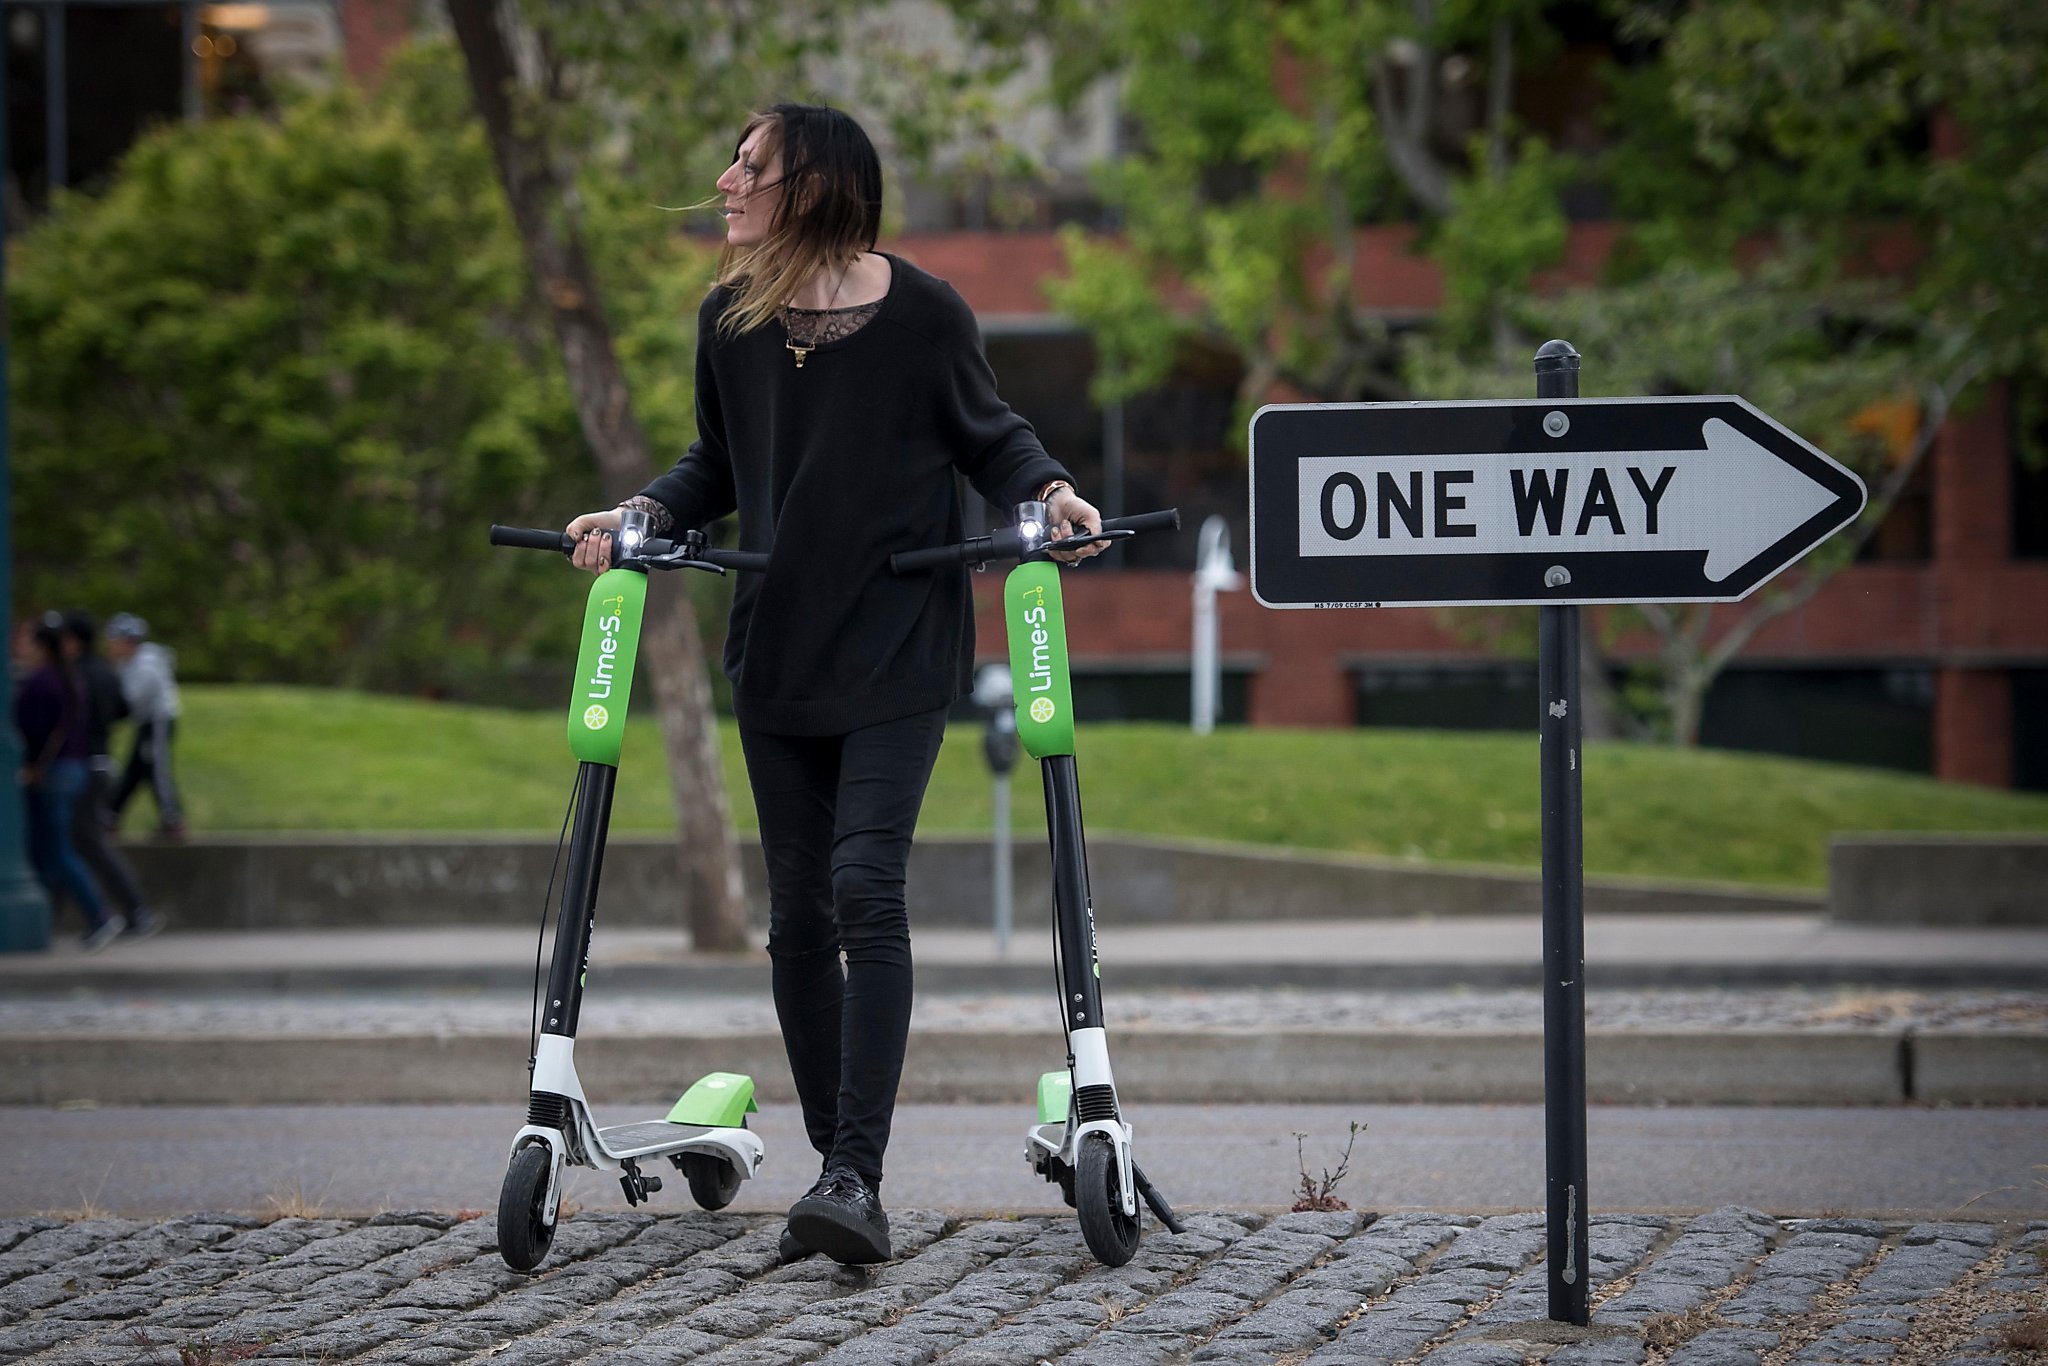 bureau stun Derivation Scooter firms swear they're not riding roughshod over users' privacy